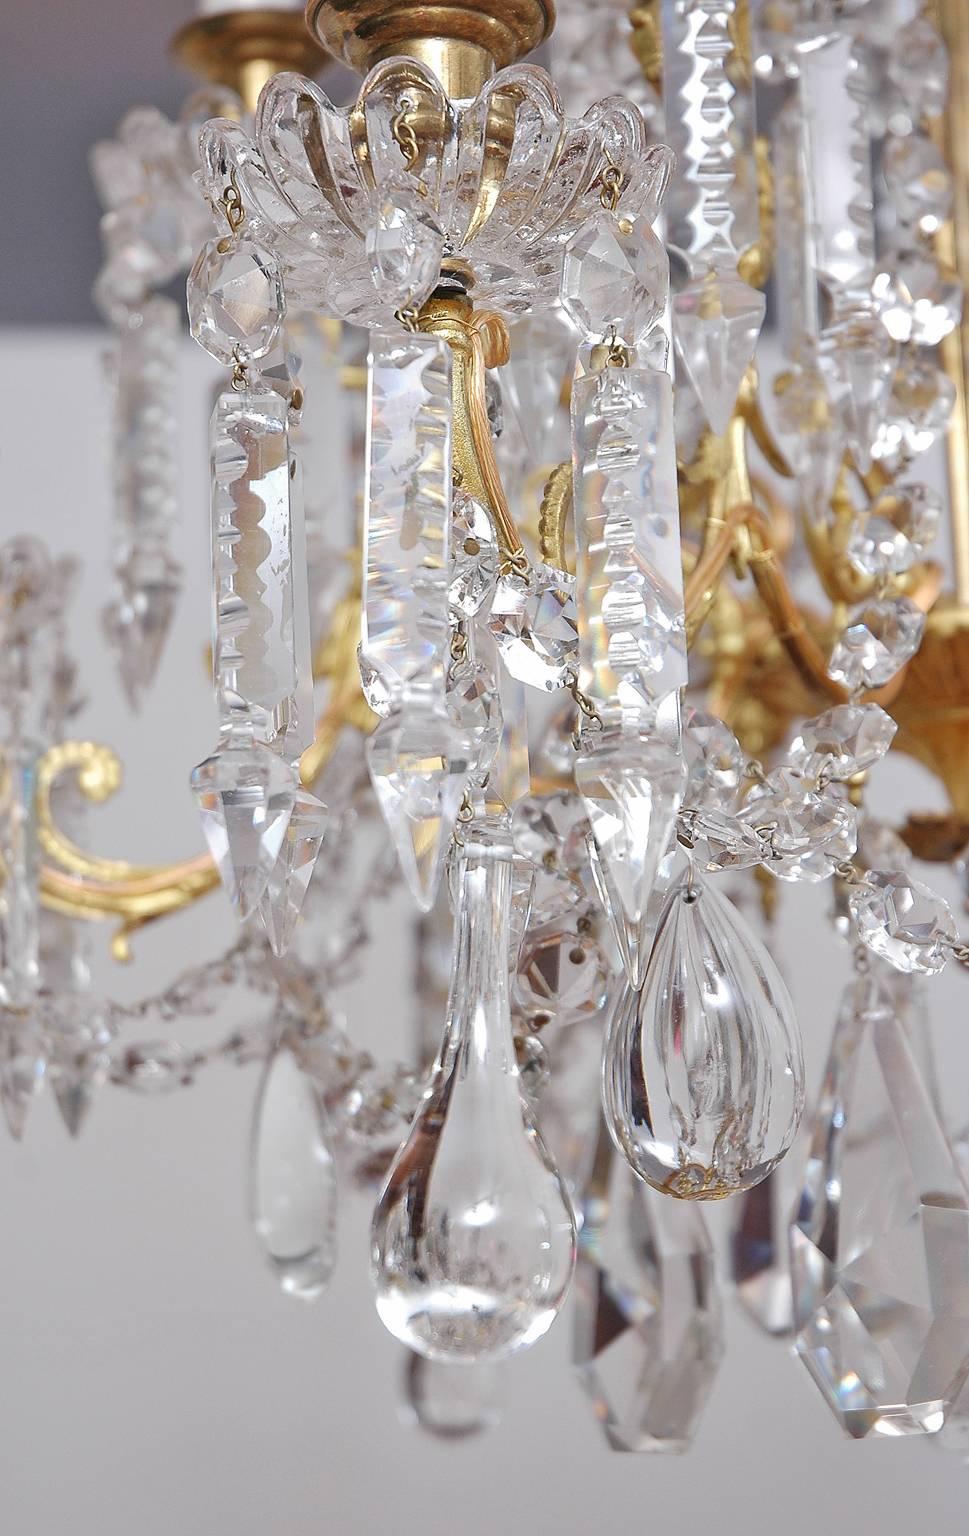 19th Century Scandinavian Cut-Glass and Crystal Chandelier with Twelve Lights, circa 1880 For Sale